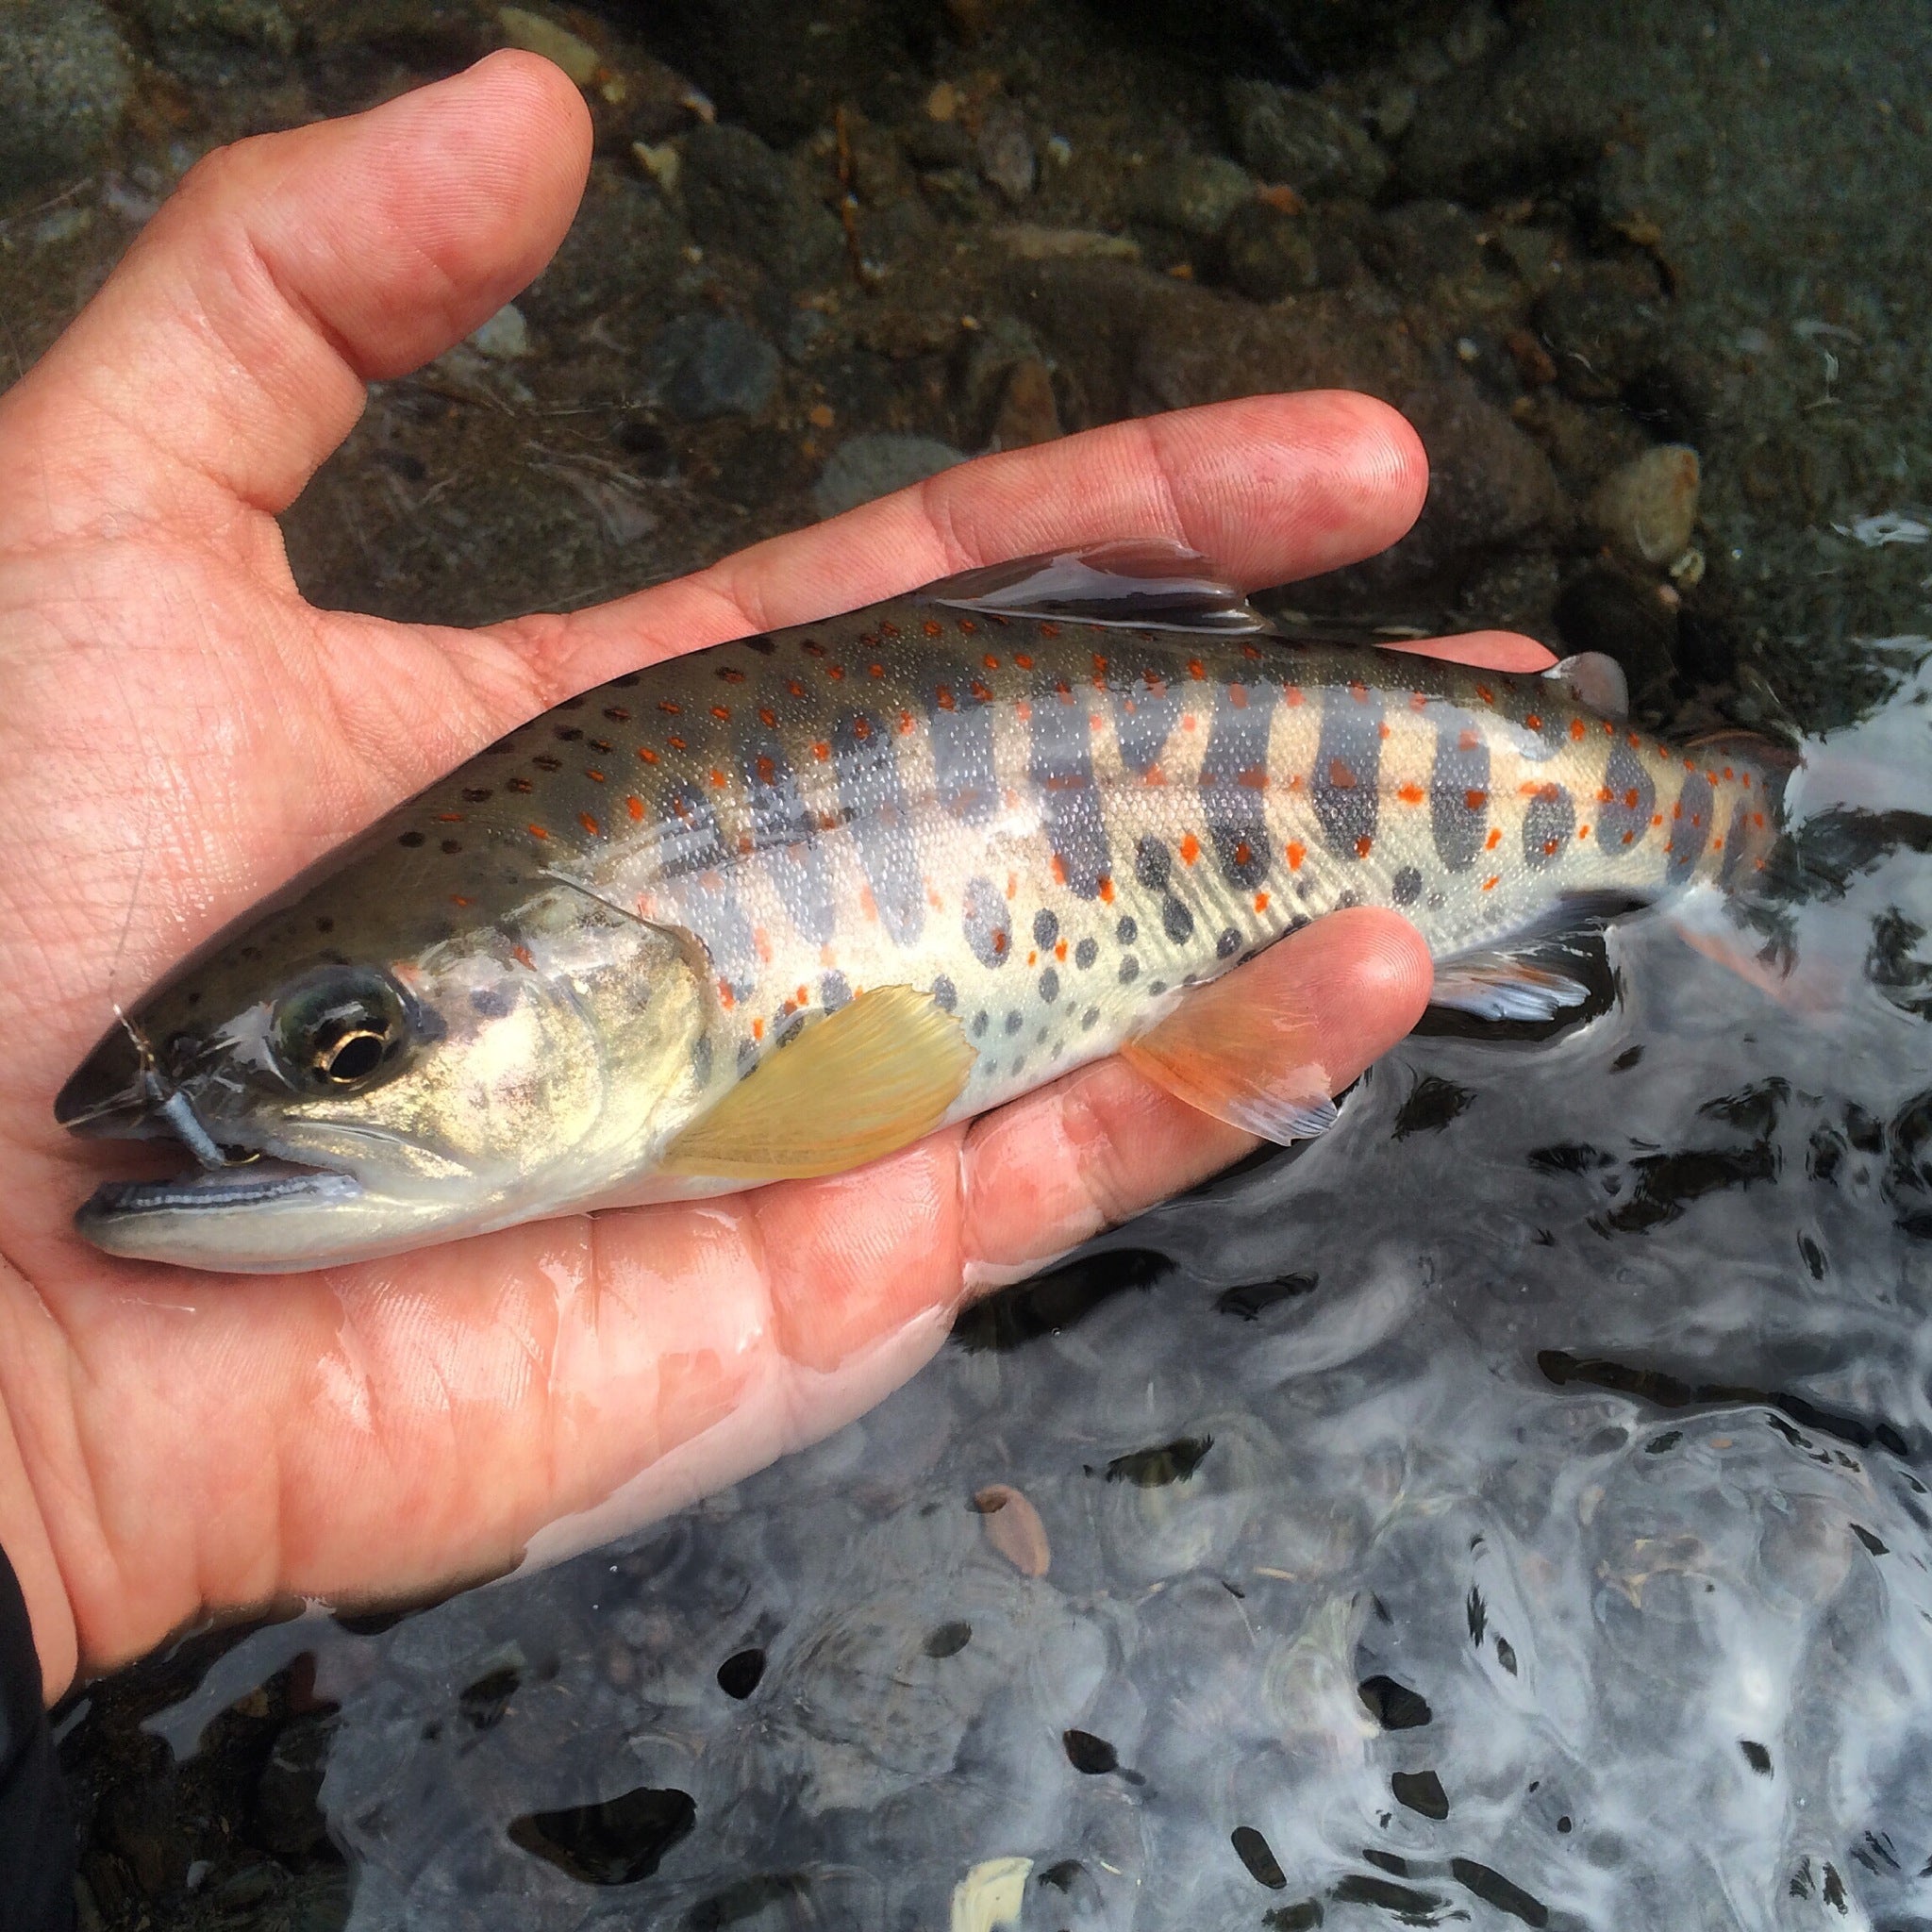 Fish of the day: Amago